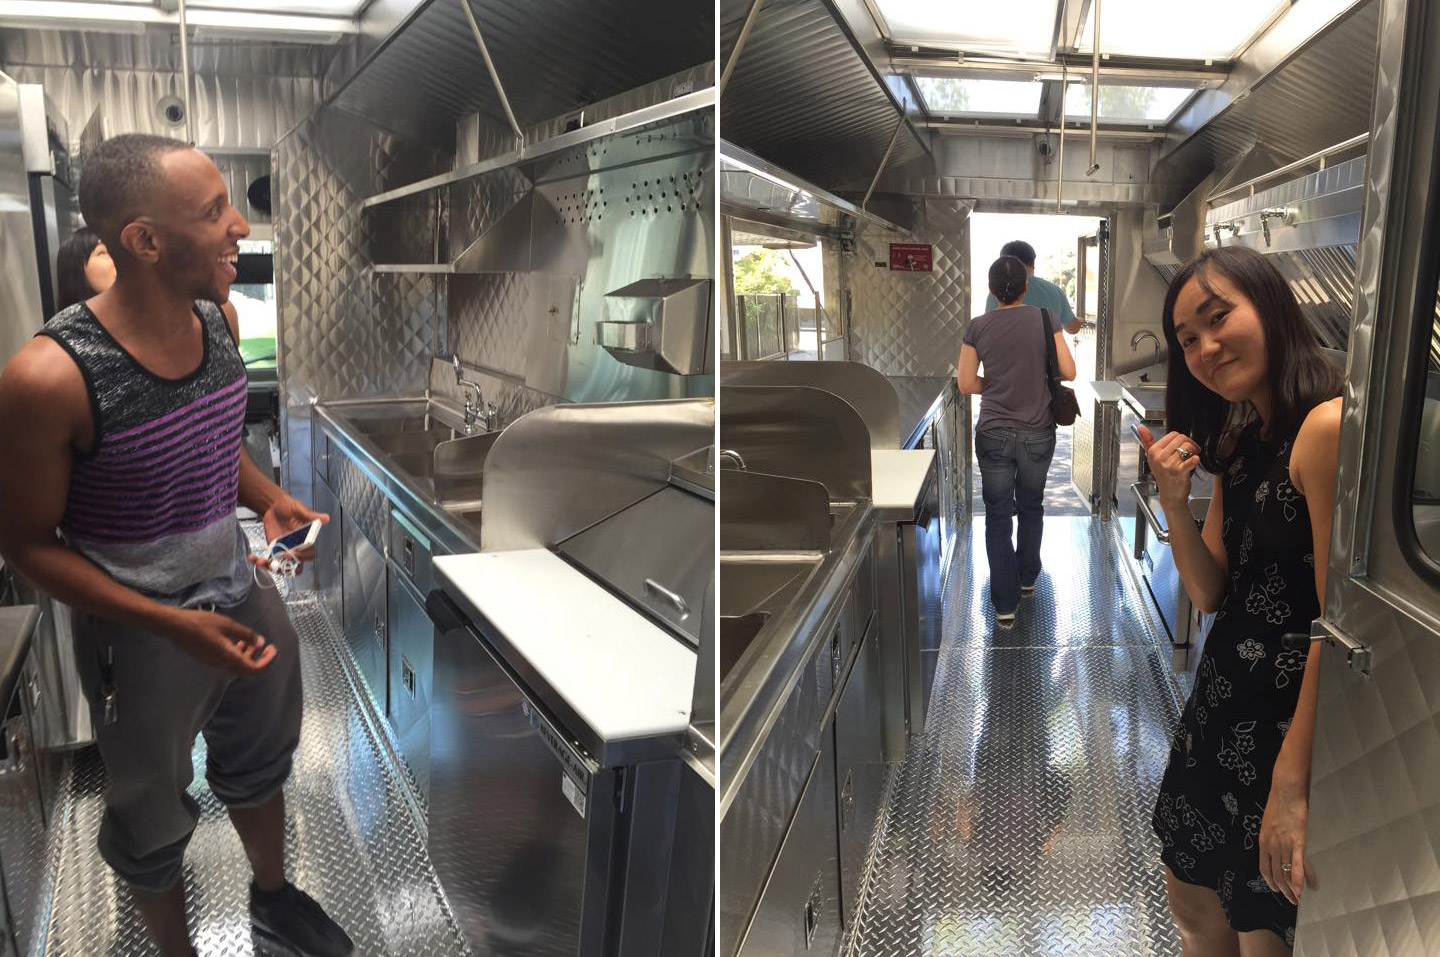 Chef Chizuru Okamoto Abraham and team give the truck one final inspection before earning a "thumbs up".